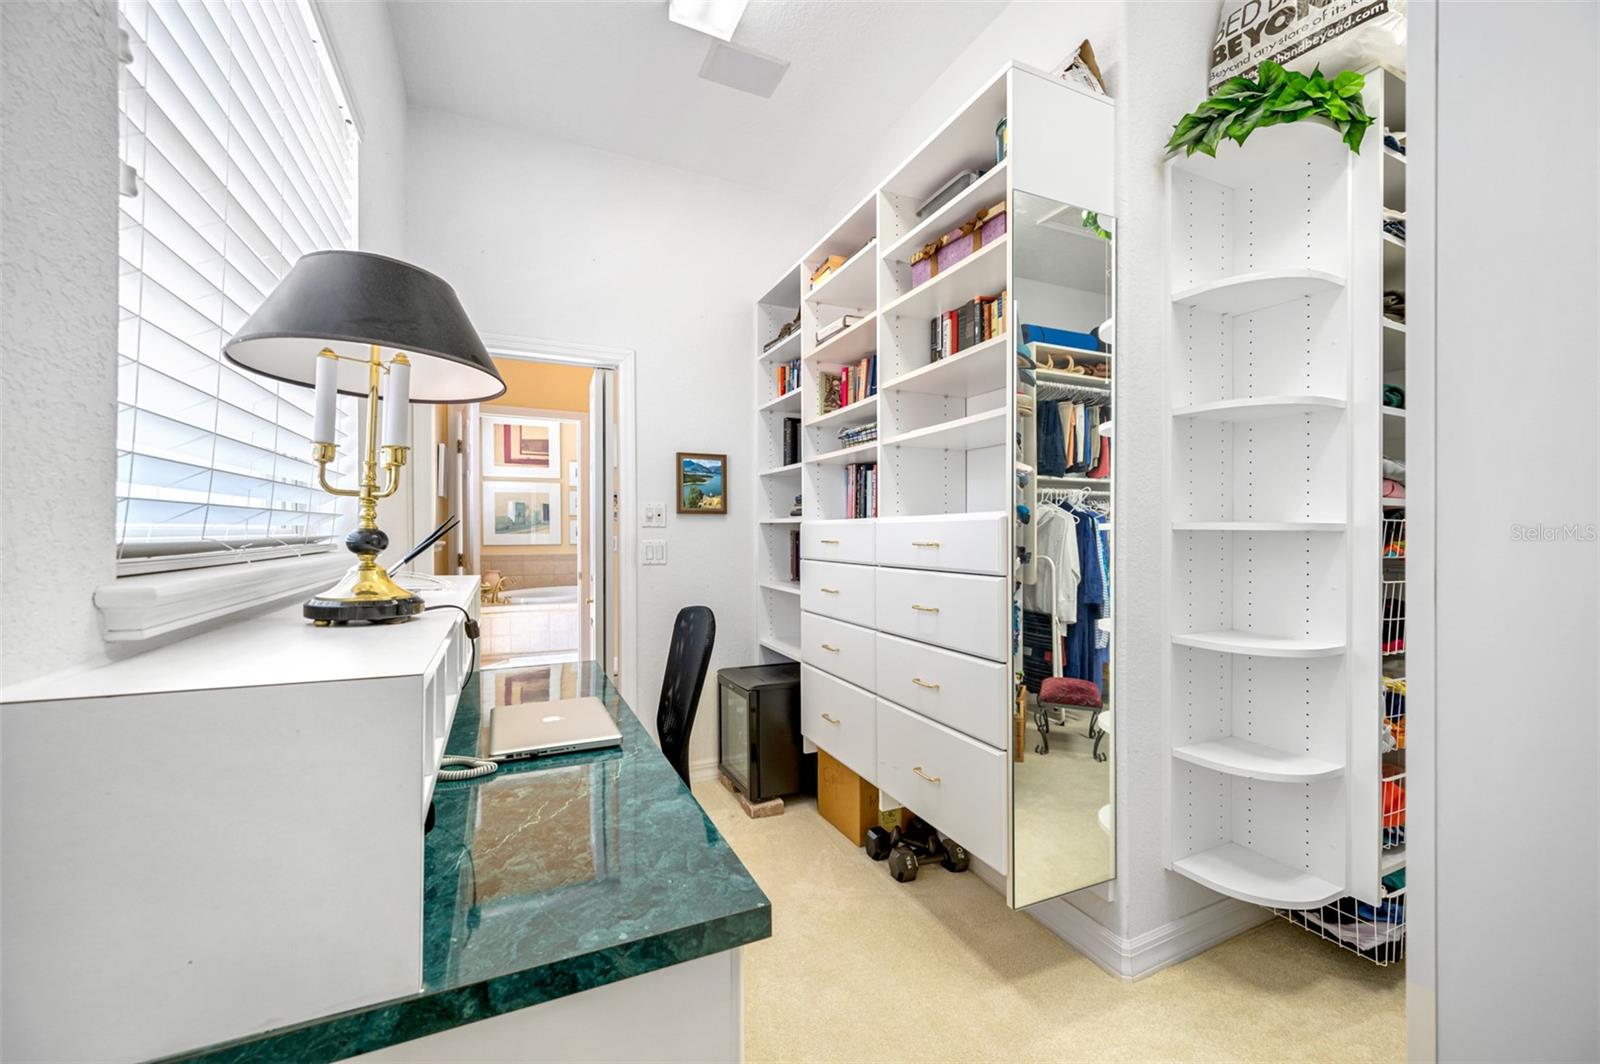 Private desk and storage area located within the his-and-hers walk-in closet